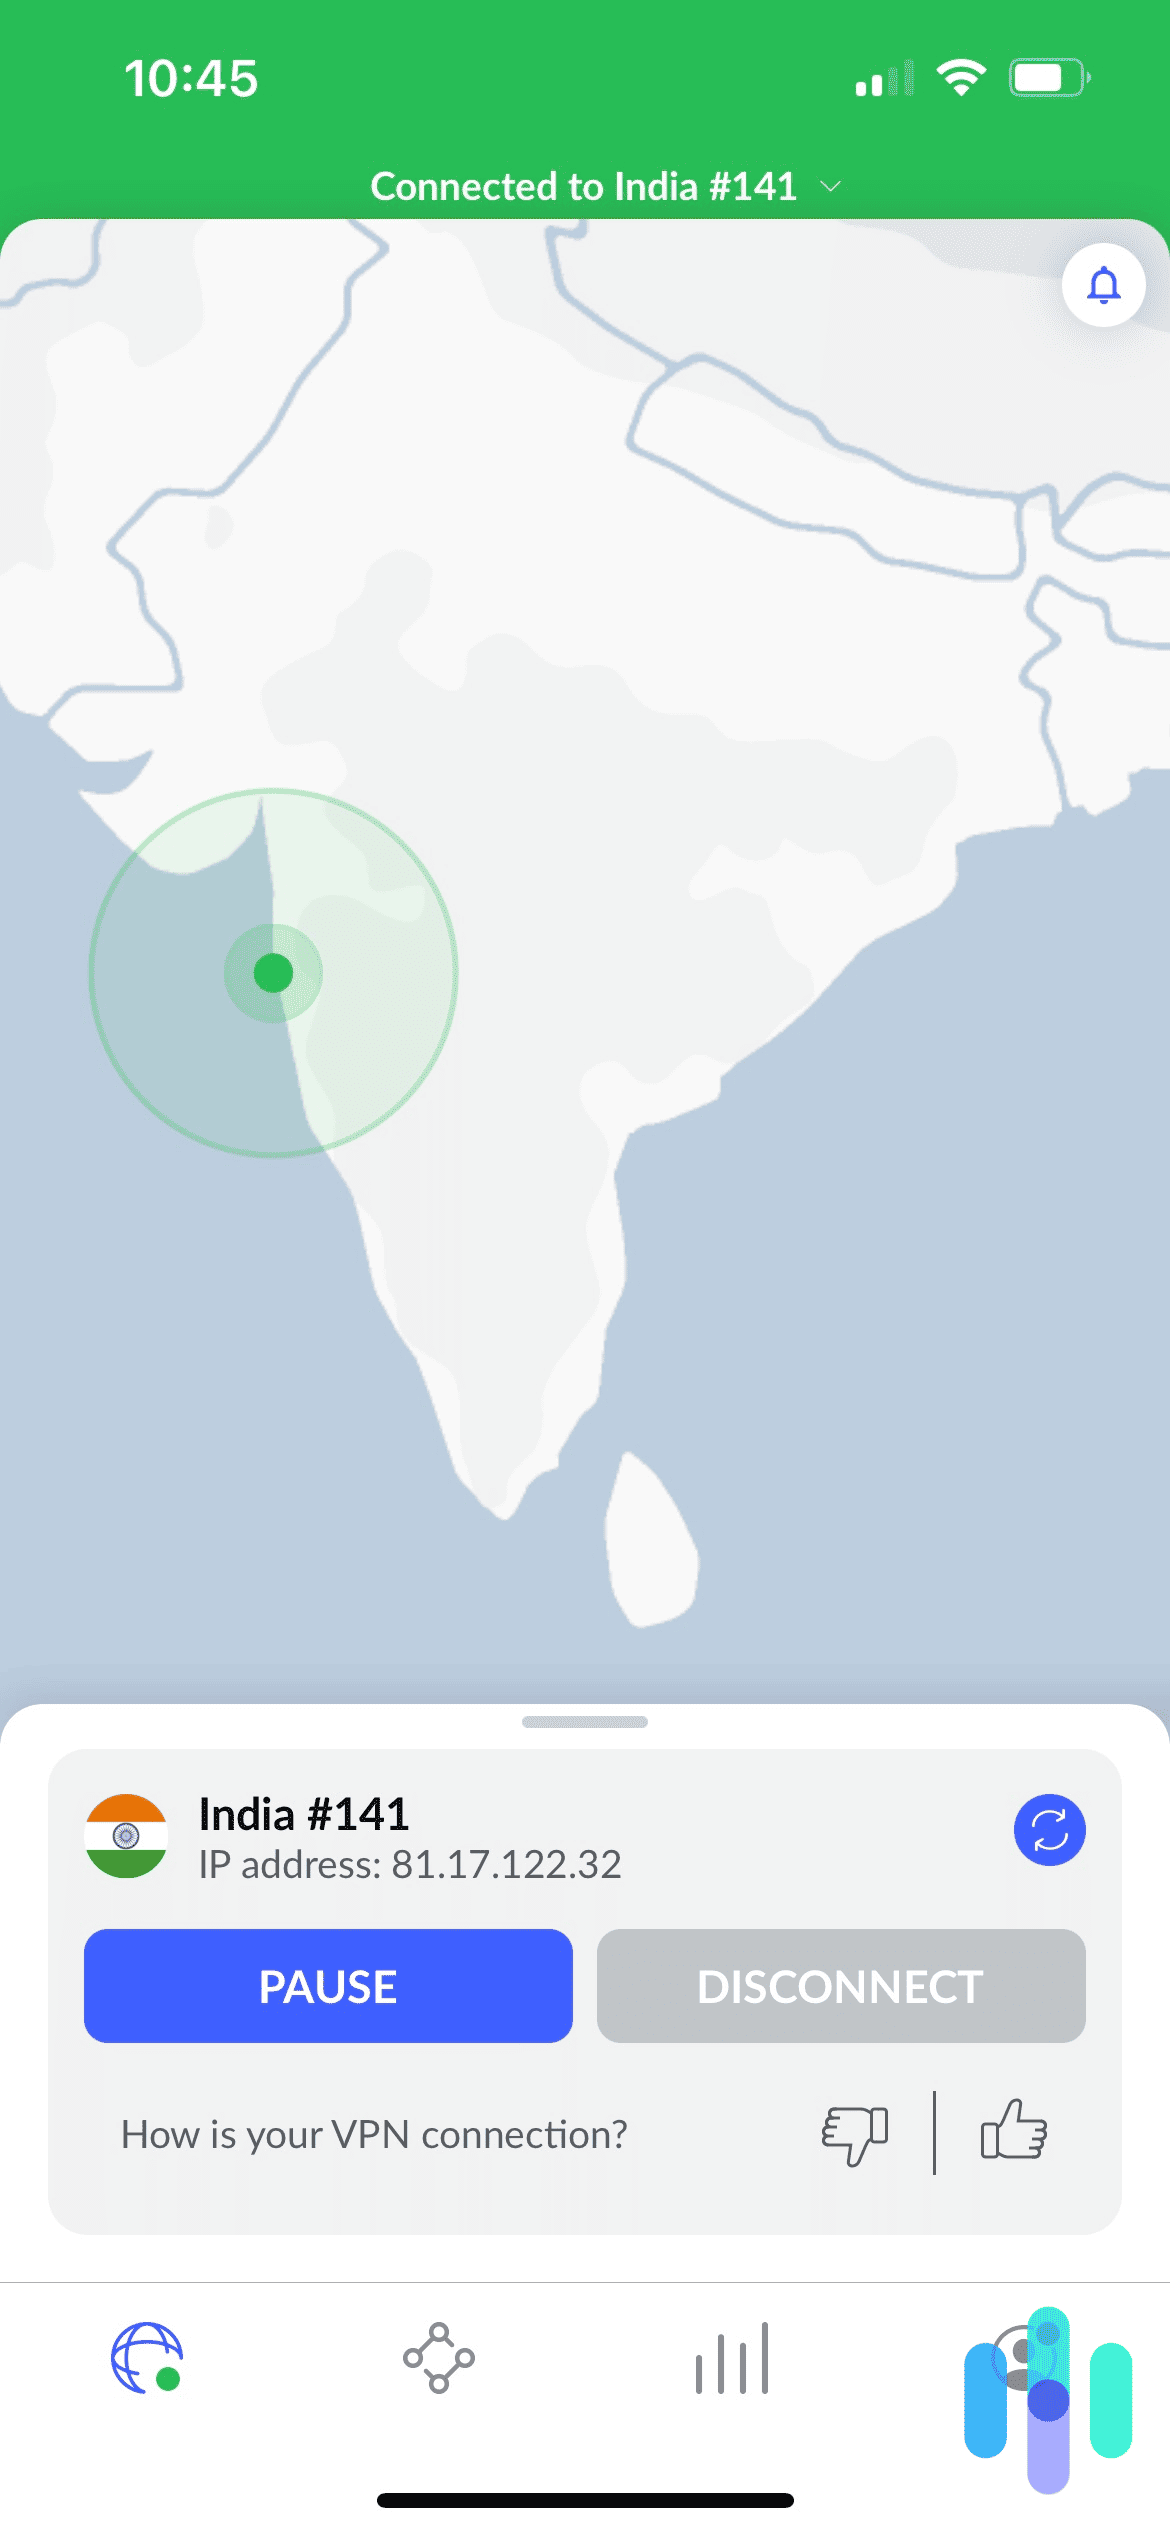 NordVPN connected to India on iPhone